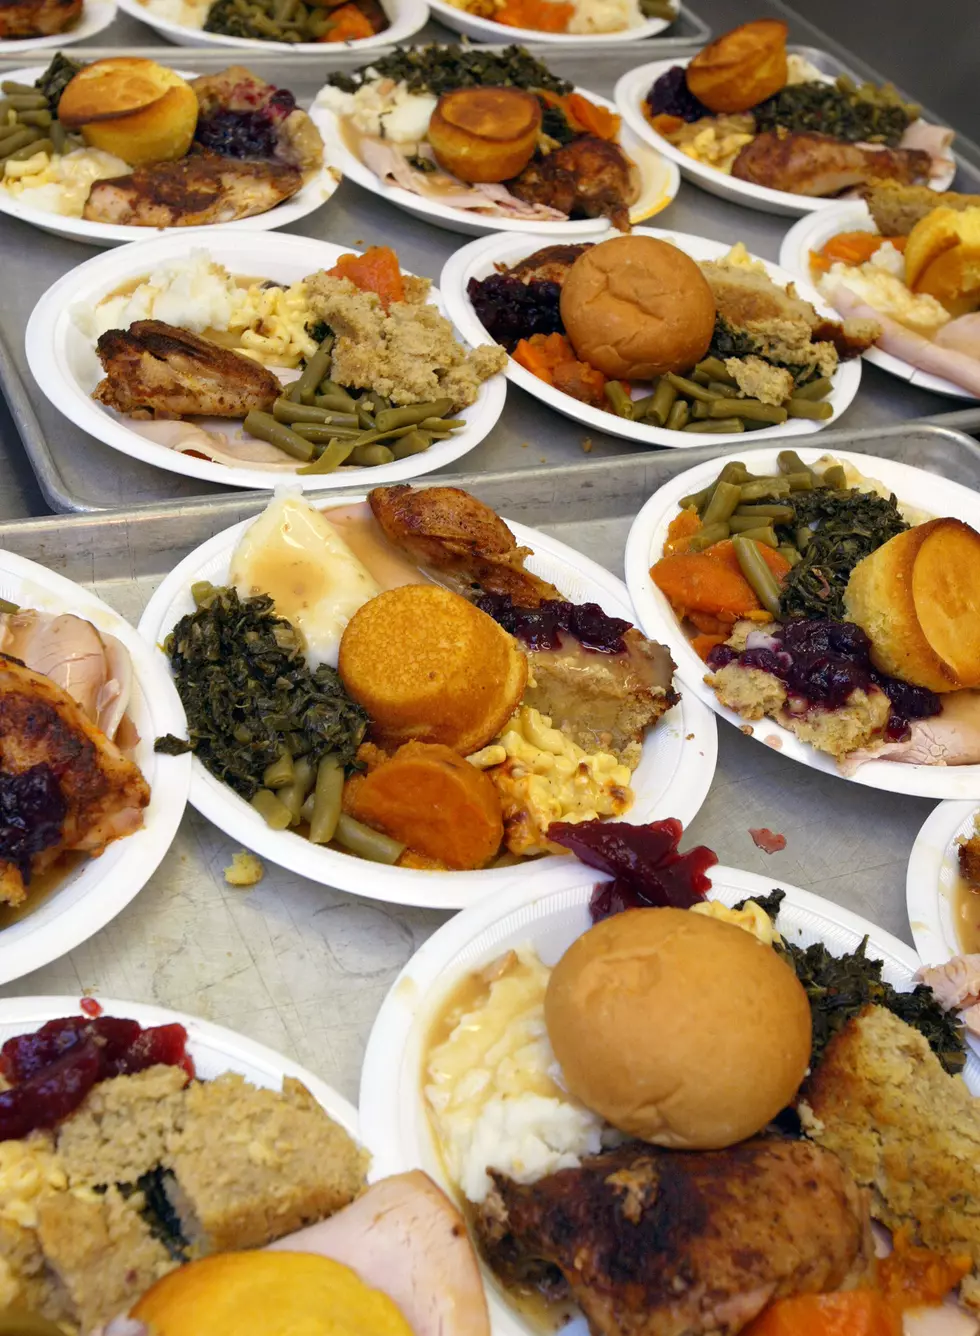 Volunteers Needed for Oneonta Community Thanksgiving Dinner